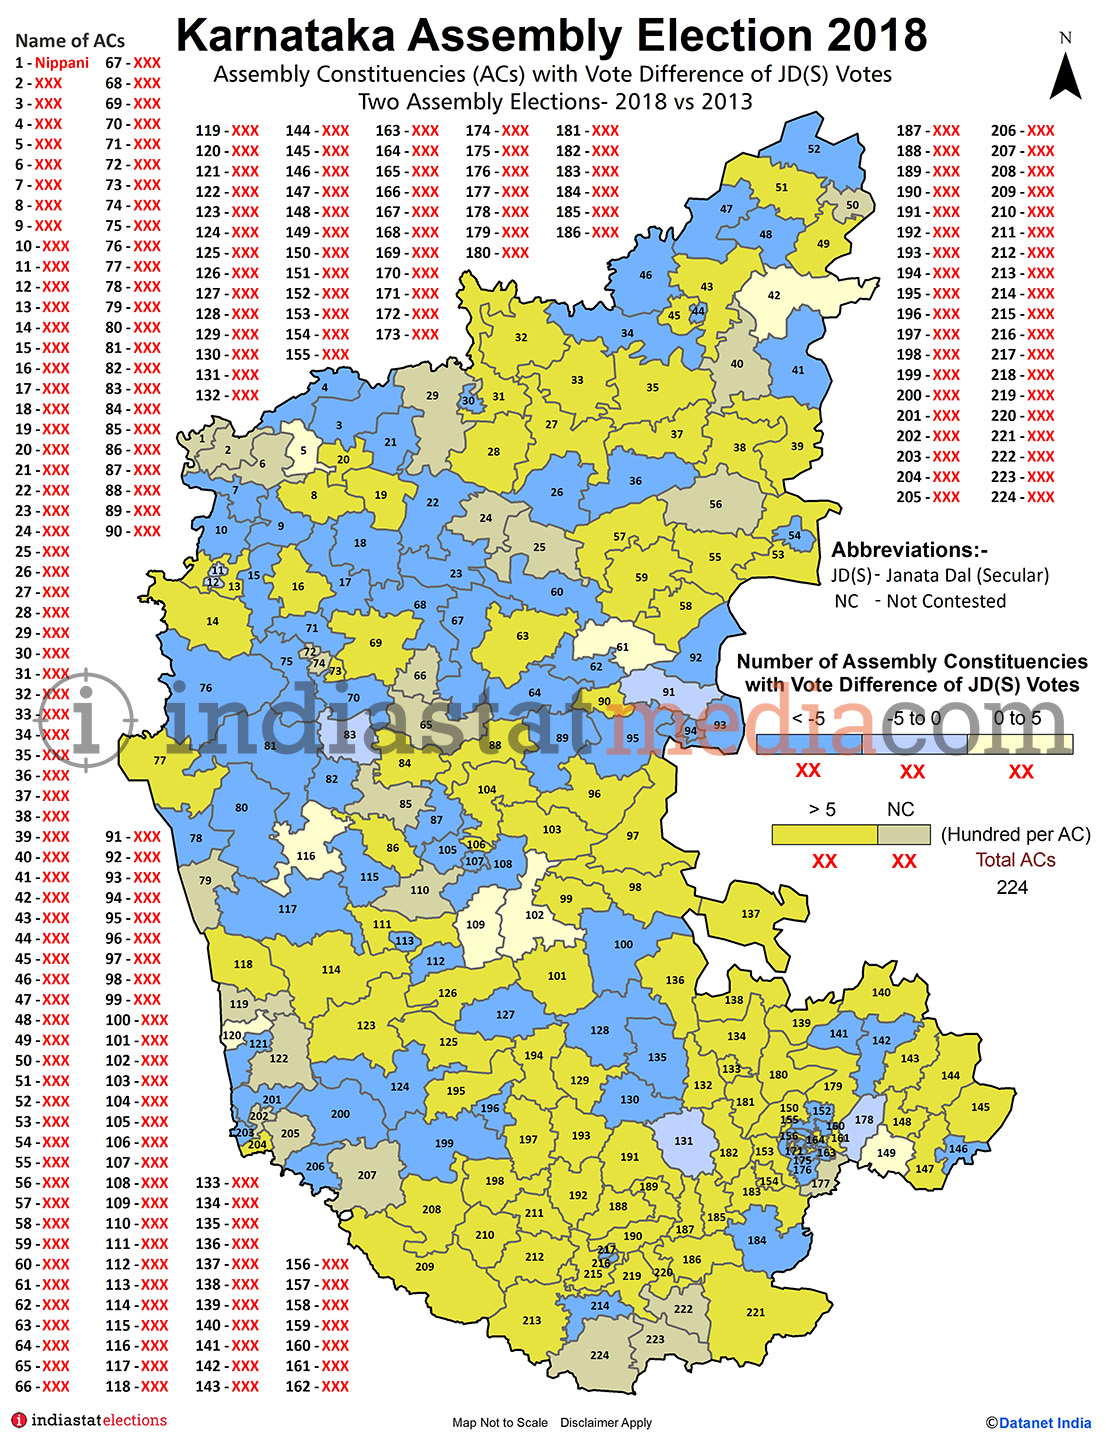 Assembly Constituencies with Vote Difference of JD(S) Votes in Karnataka (Assembly Elections - 2013 & 2018)